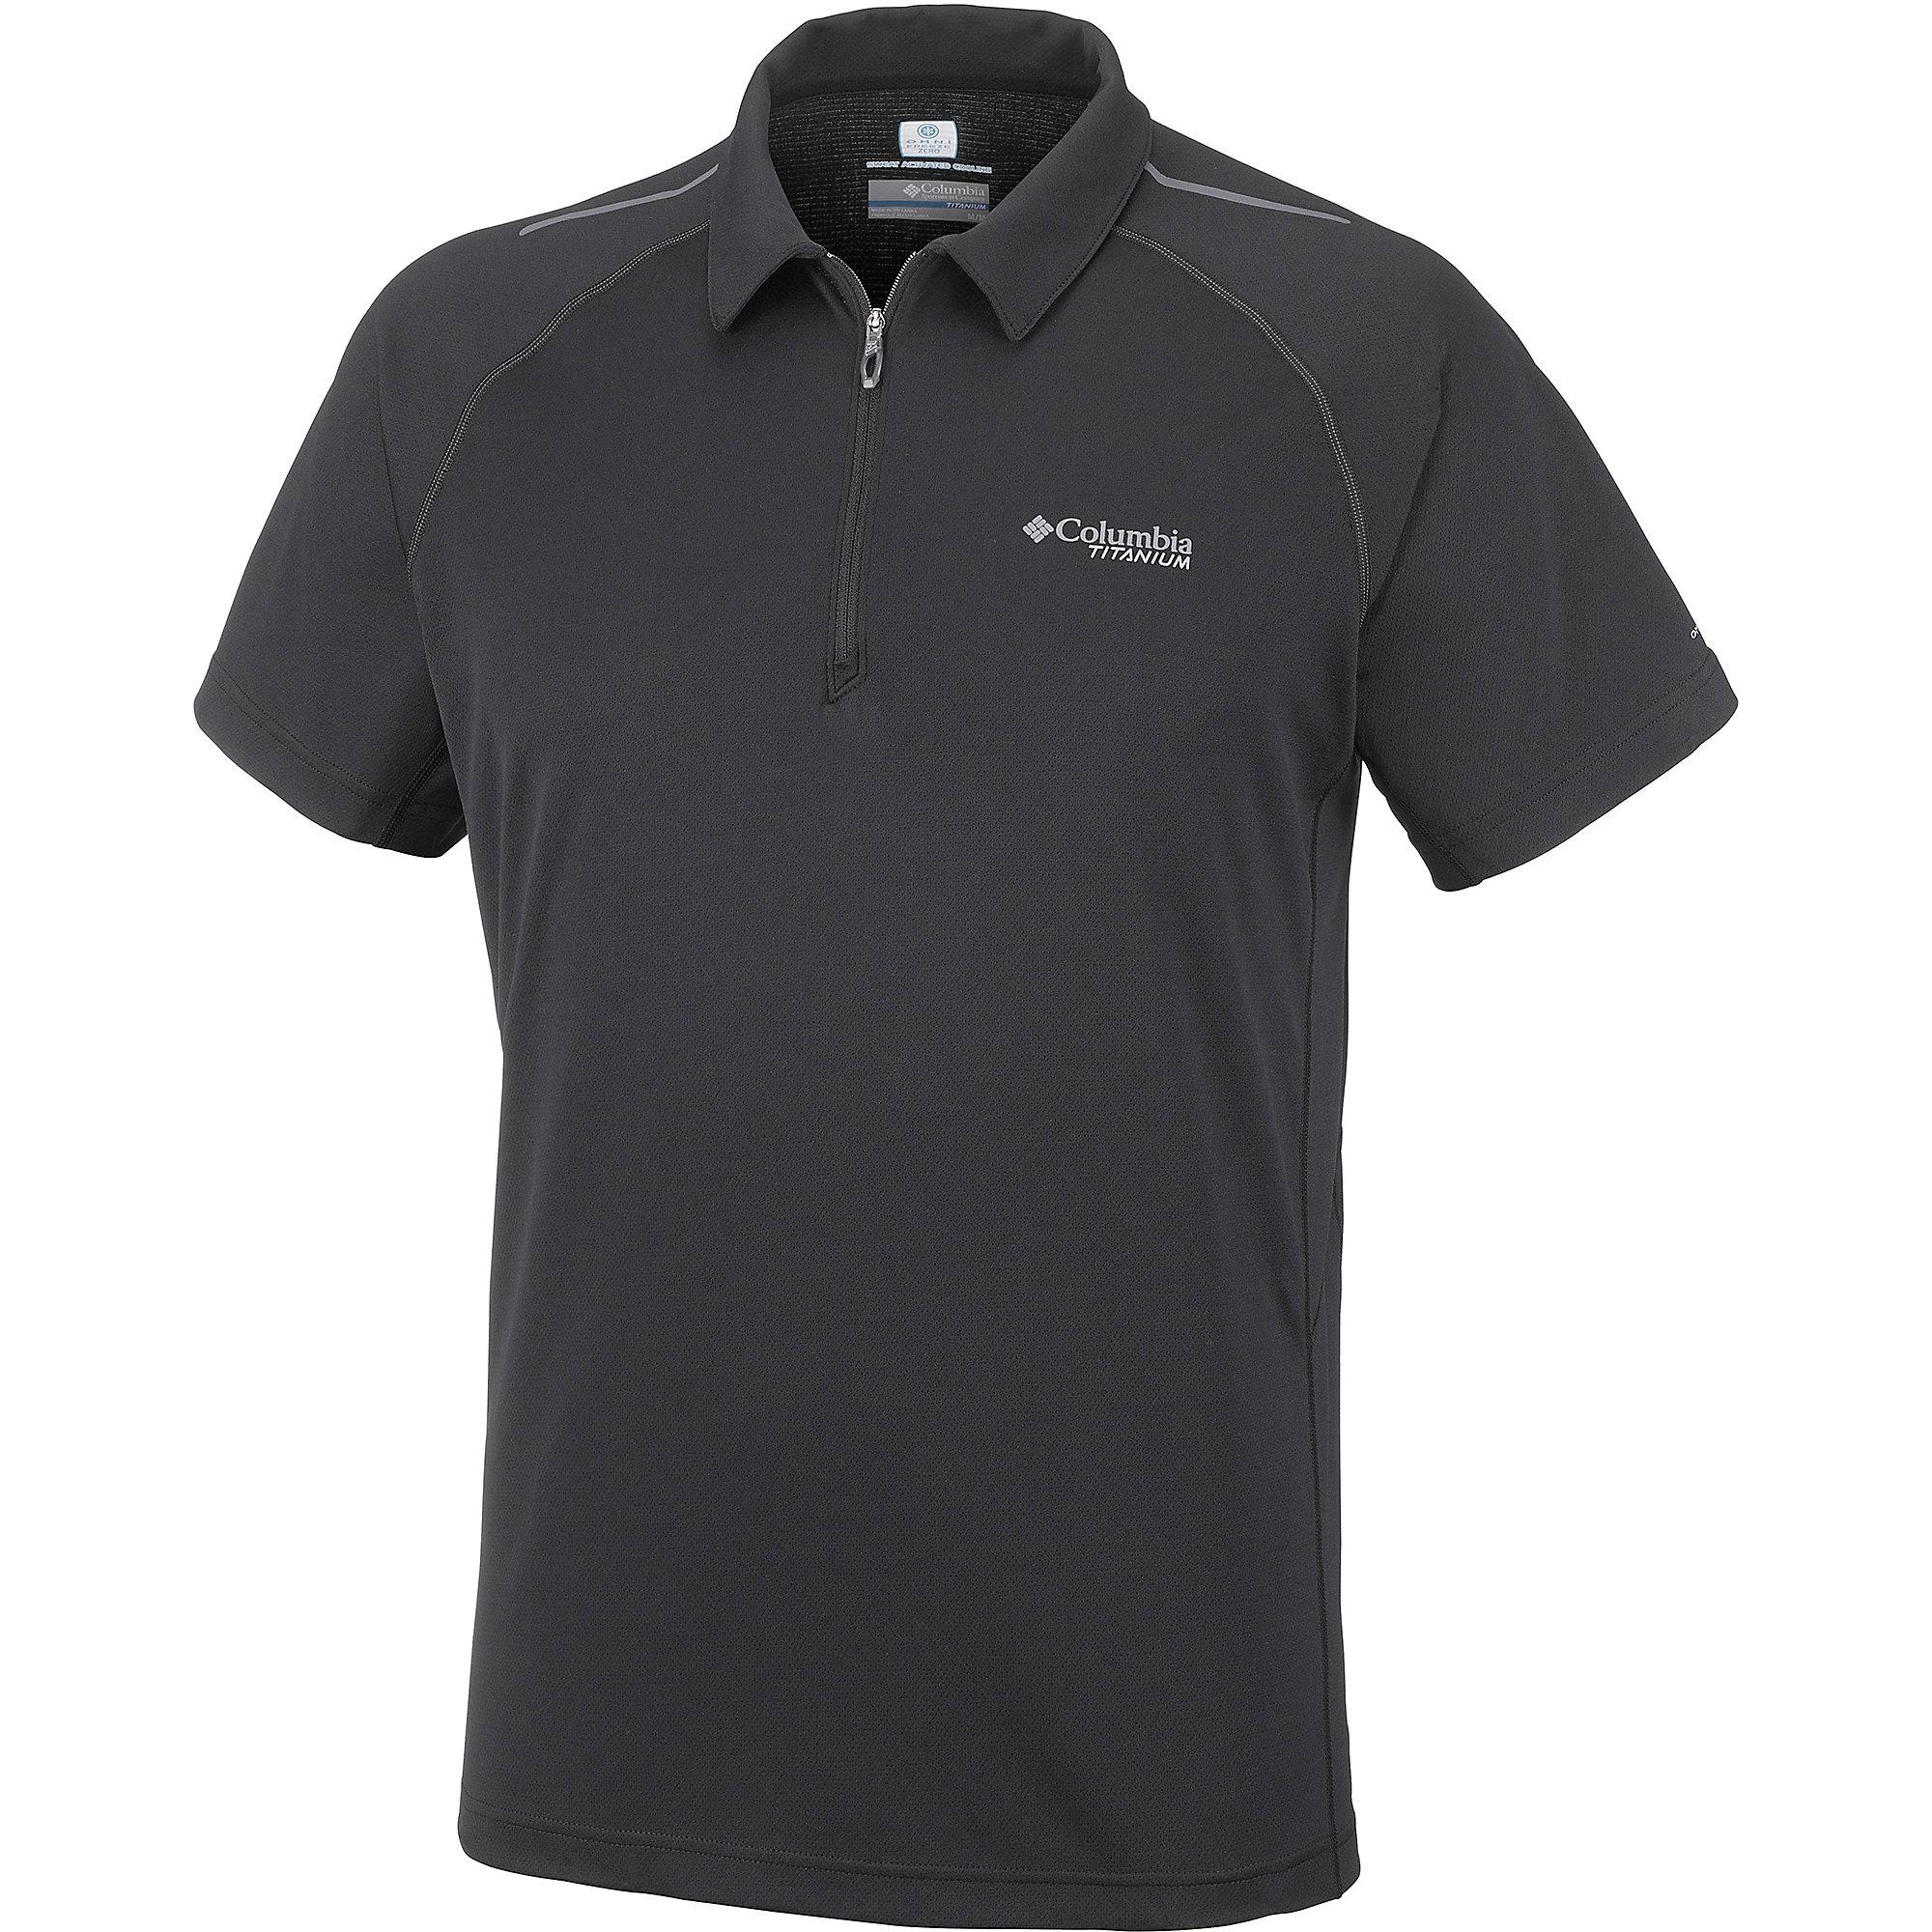 Columbia Synthetic Titan Trail Polo Shirt in Black for Men - Save 41% ...